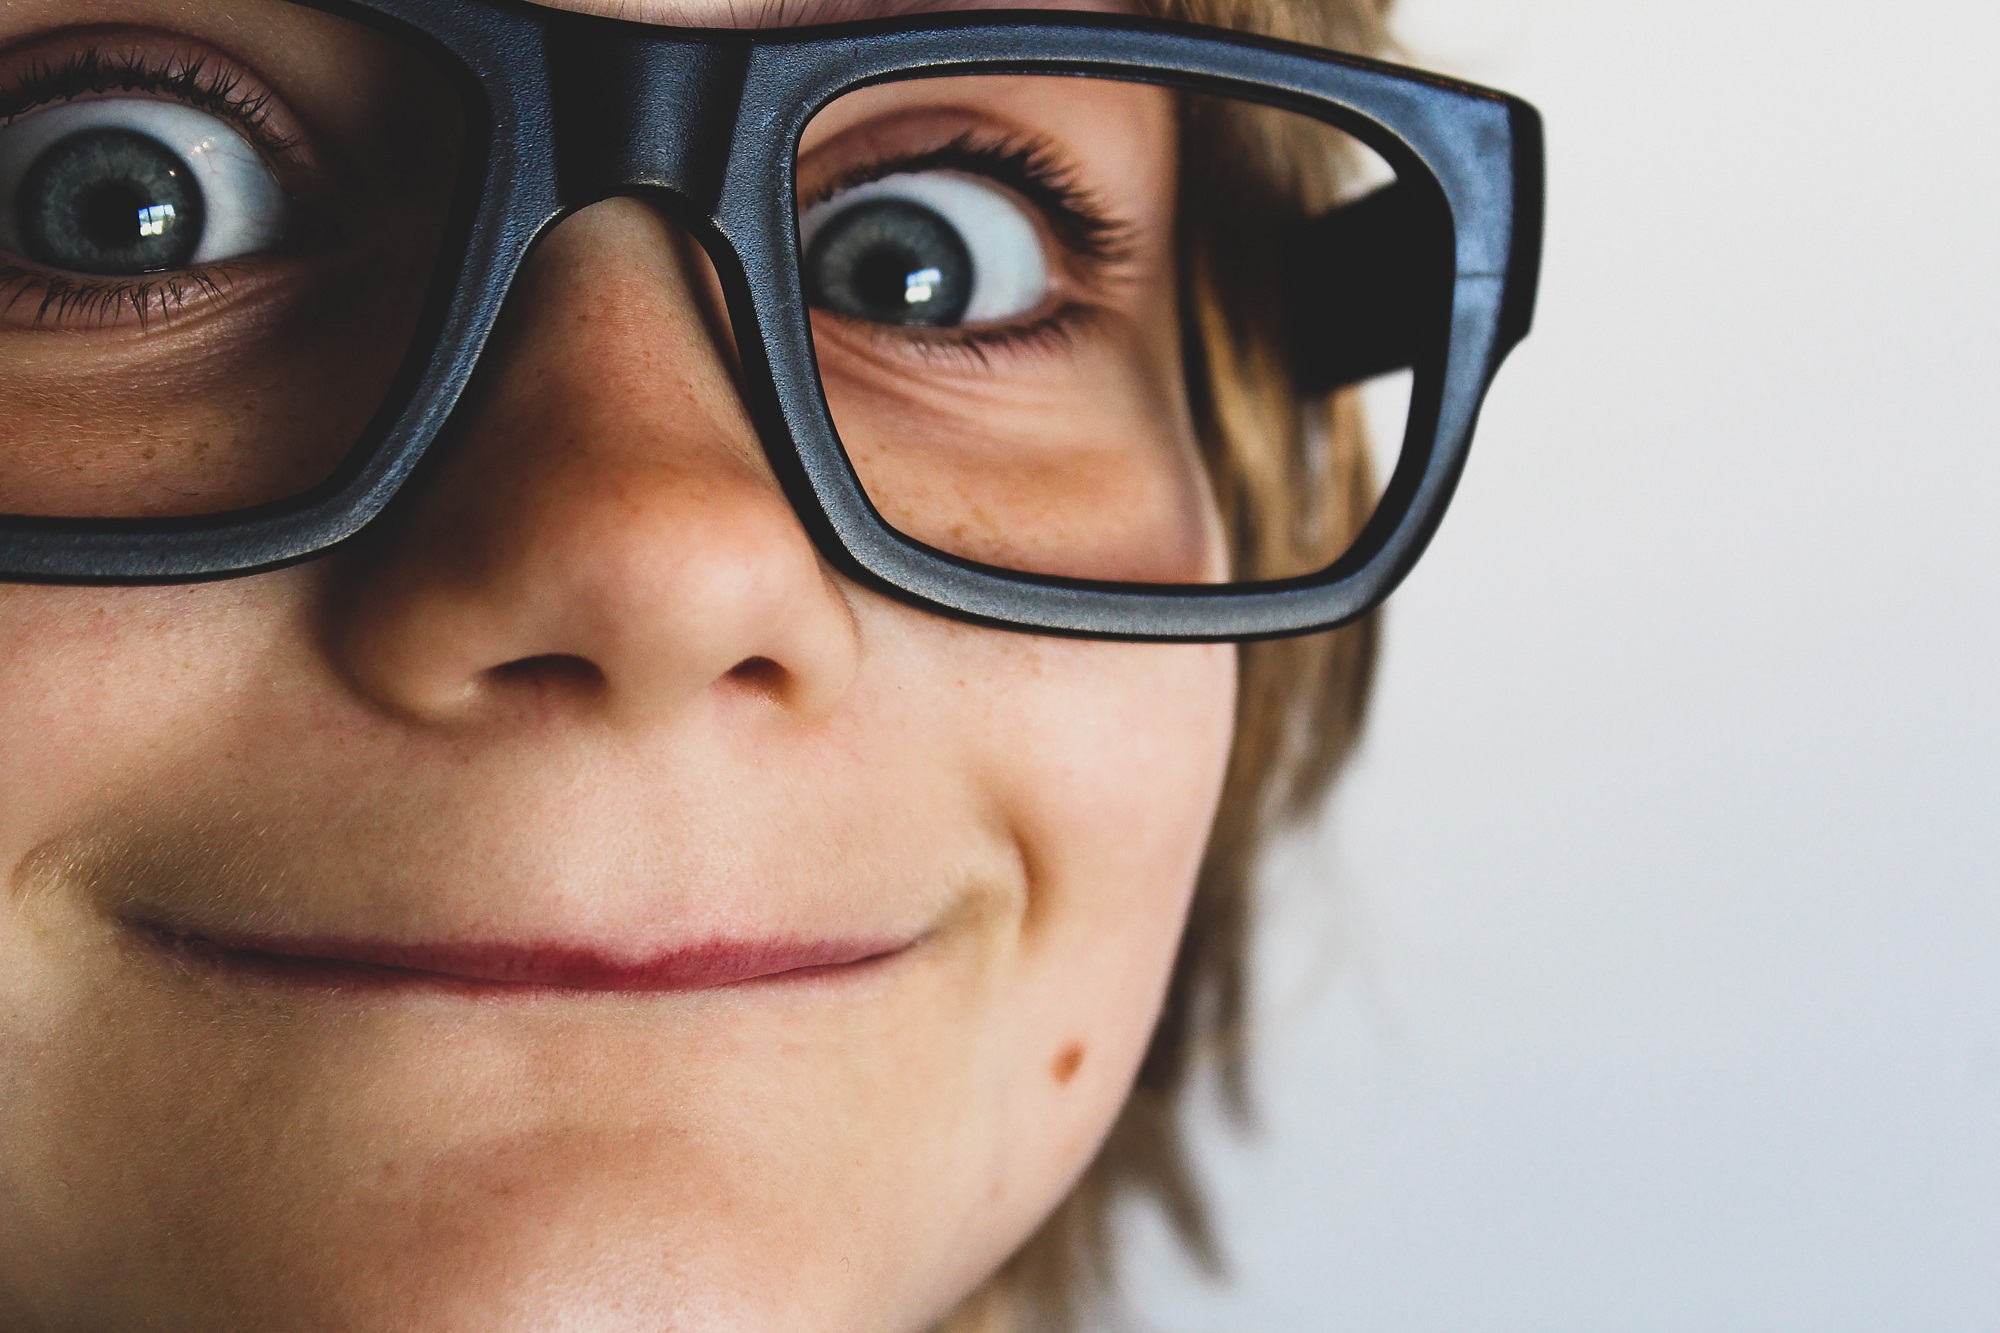 When Should Children Have Their Eyes Examined?